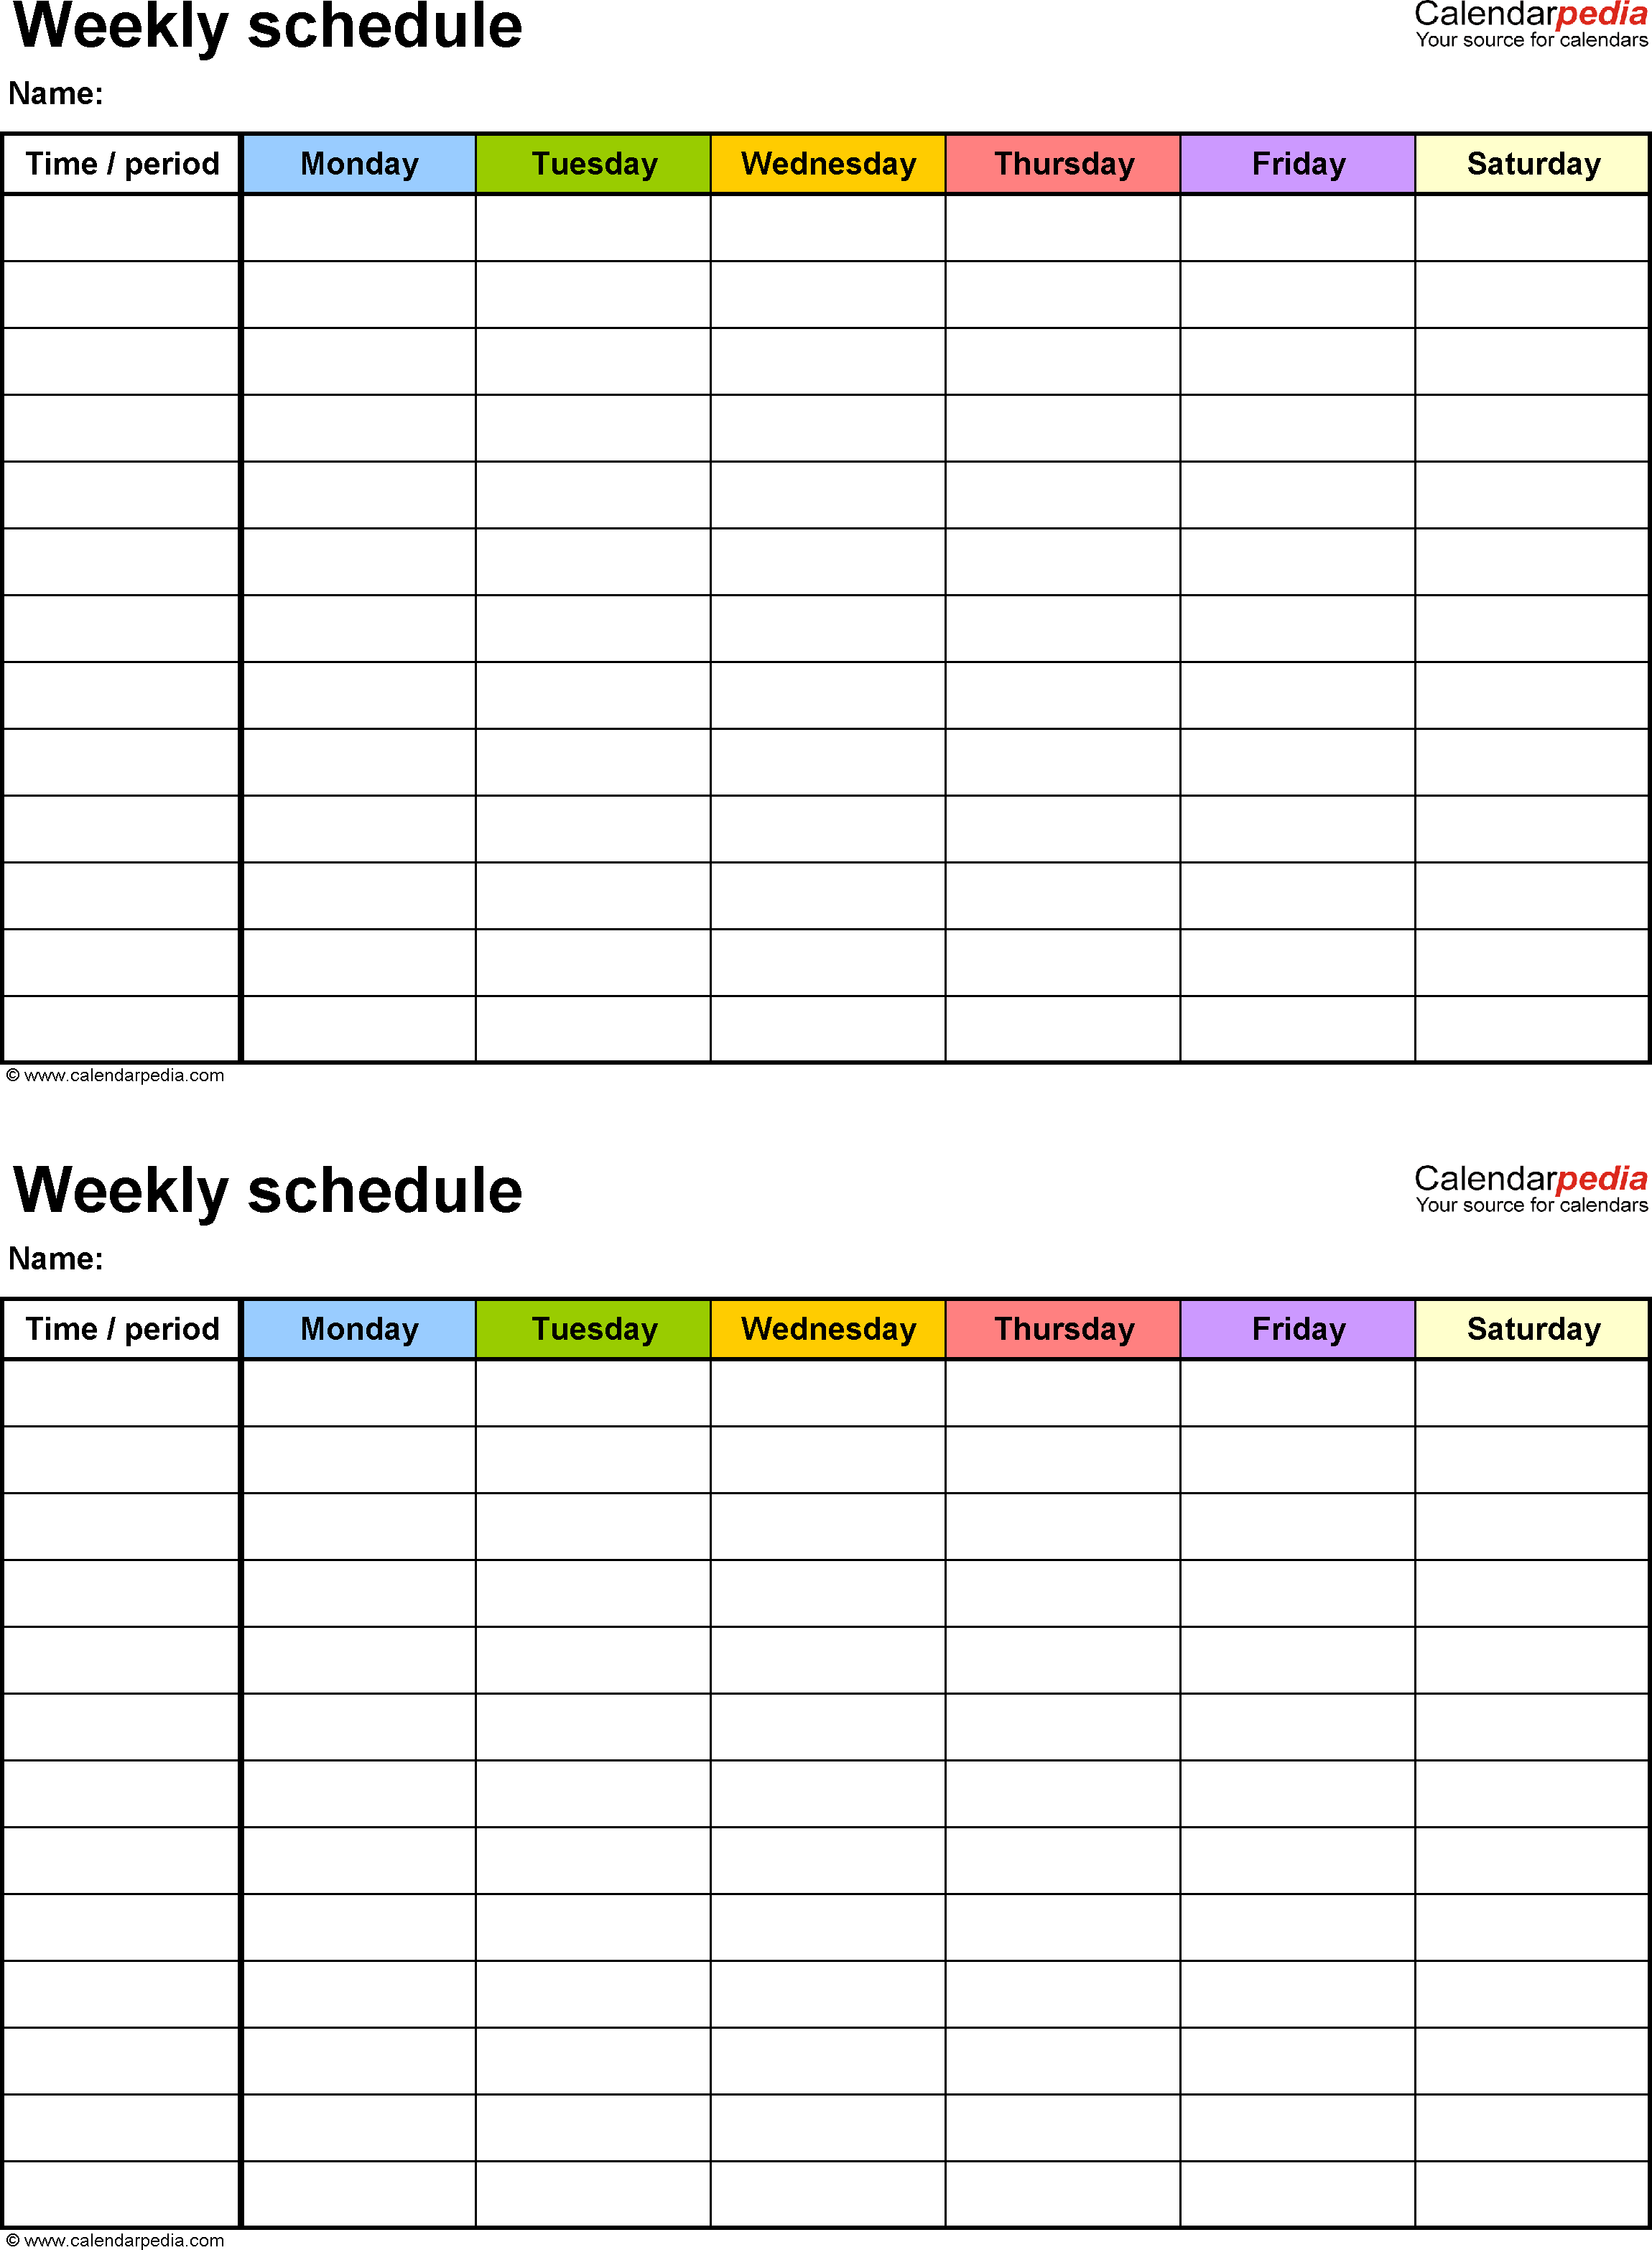 40 The Best Class Schedule Template For Excel With Stunning Design for Class Schedule Template For Excel